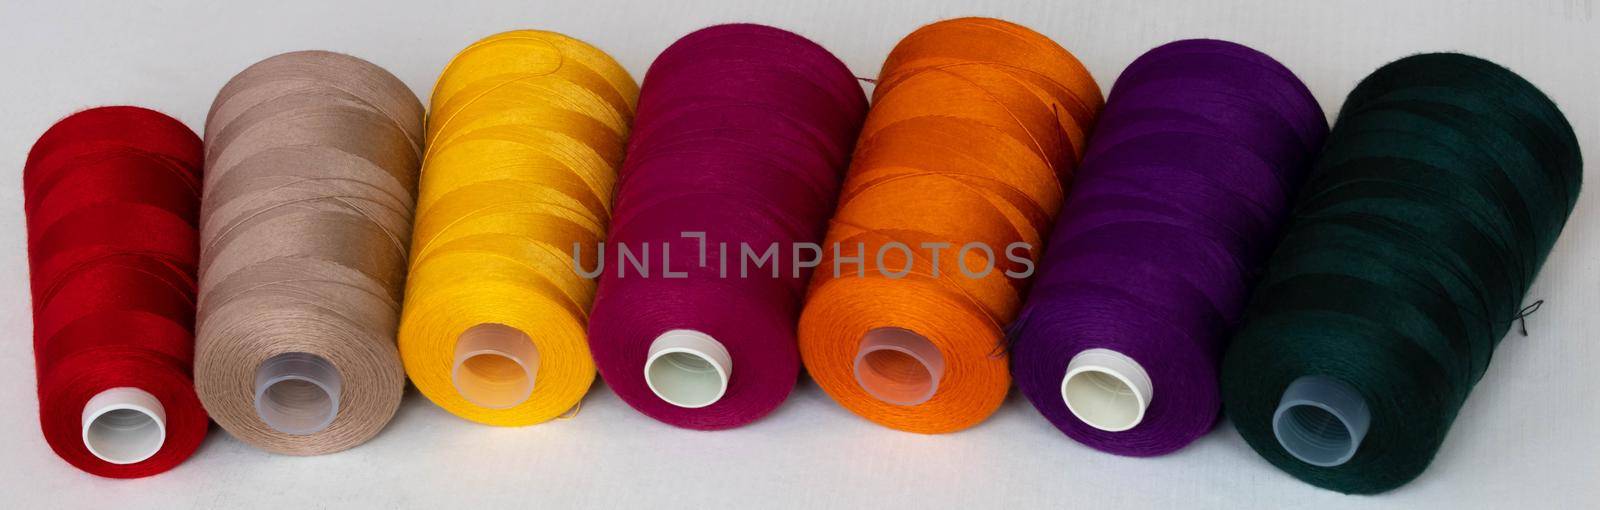 Panorama of colorful bobbins isolated on a white background.